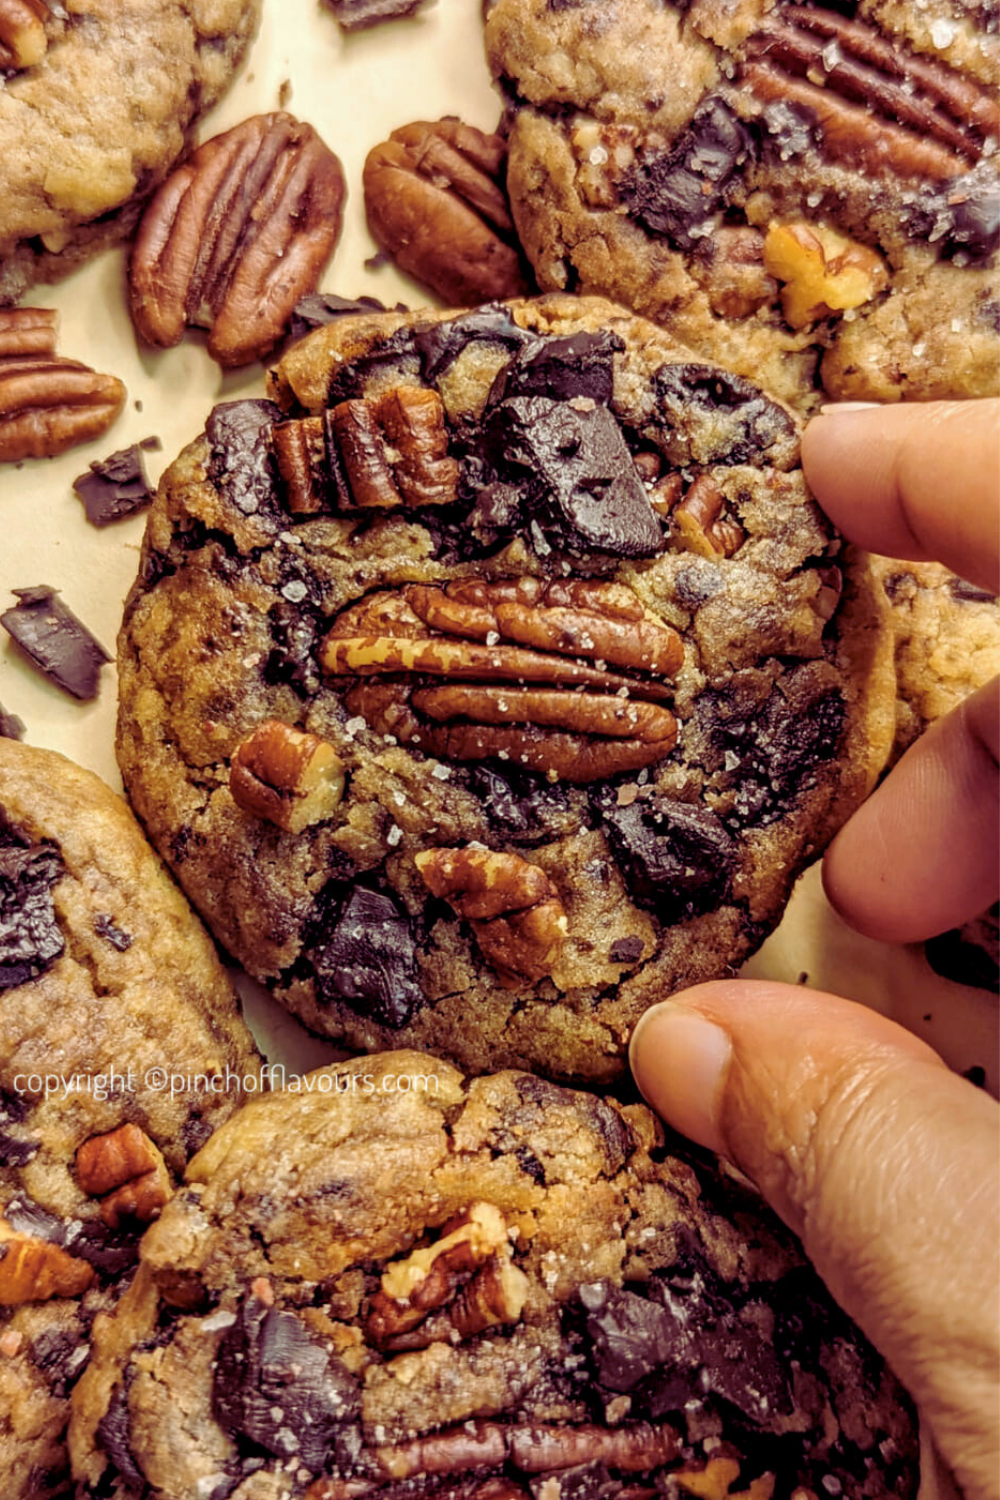 Air Fryer Brown Butter Pecan Cookies With Chocolate Chunks